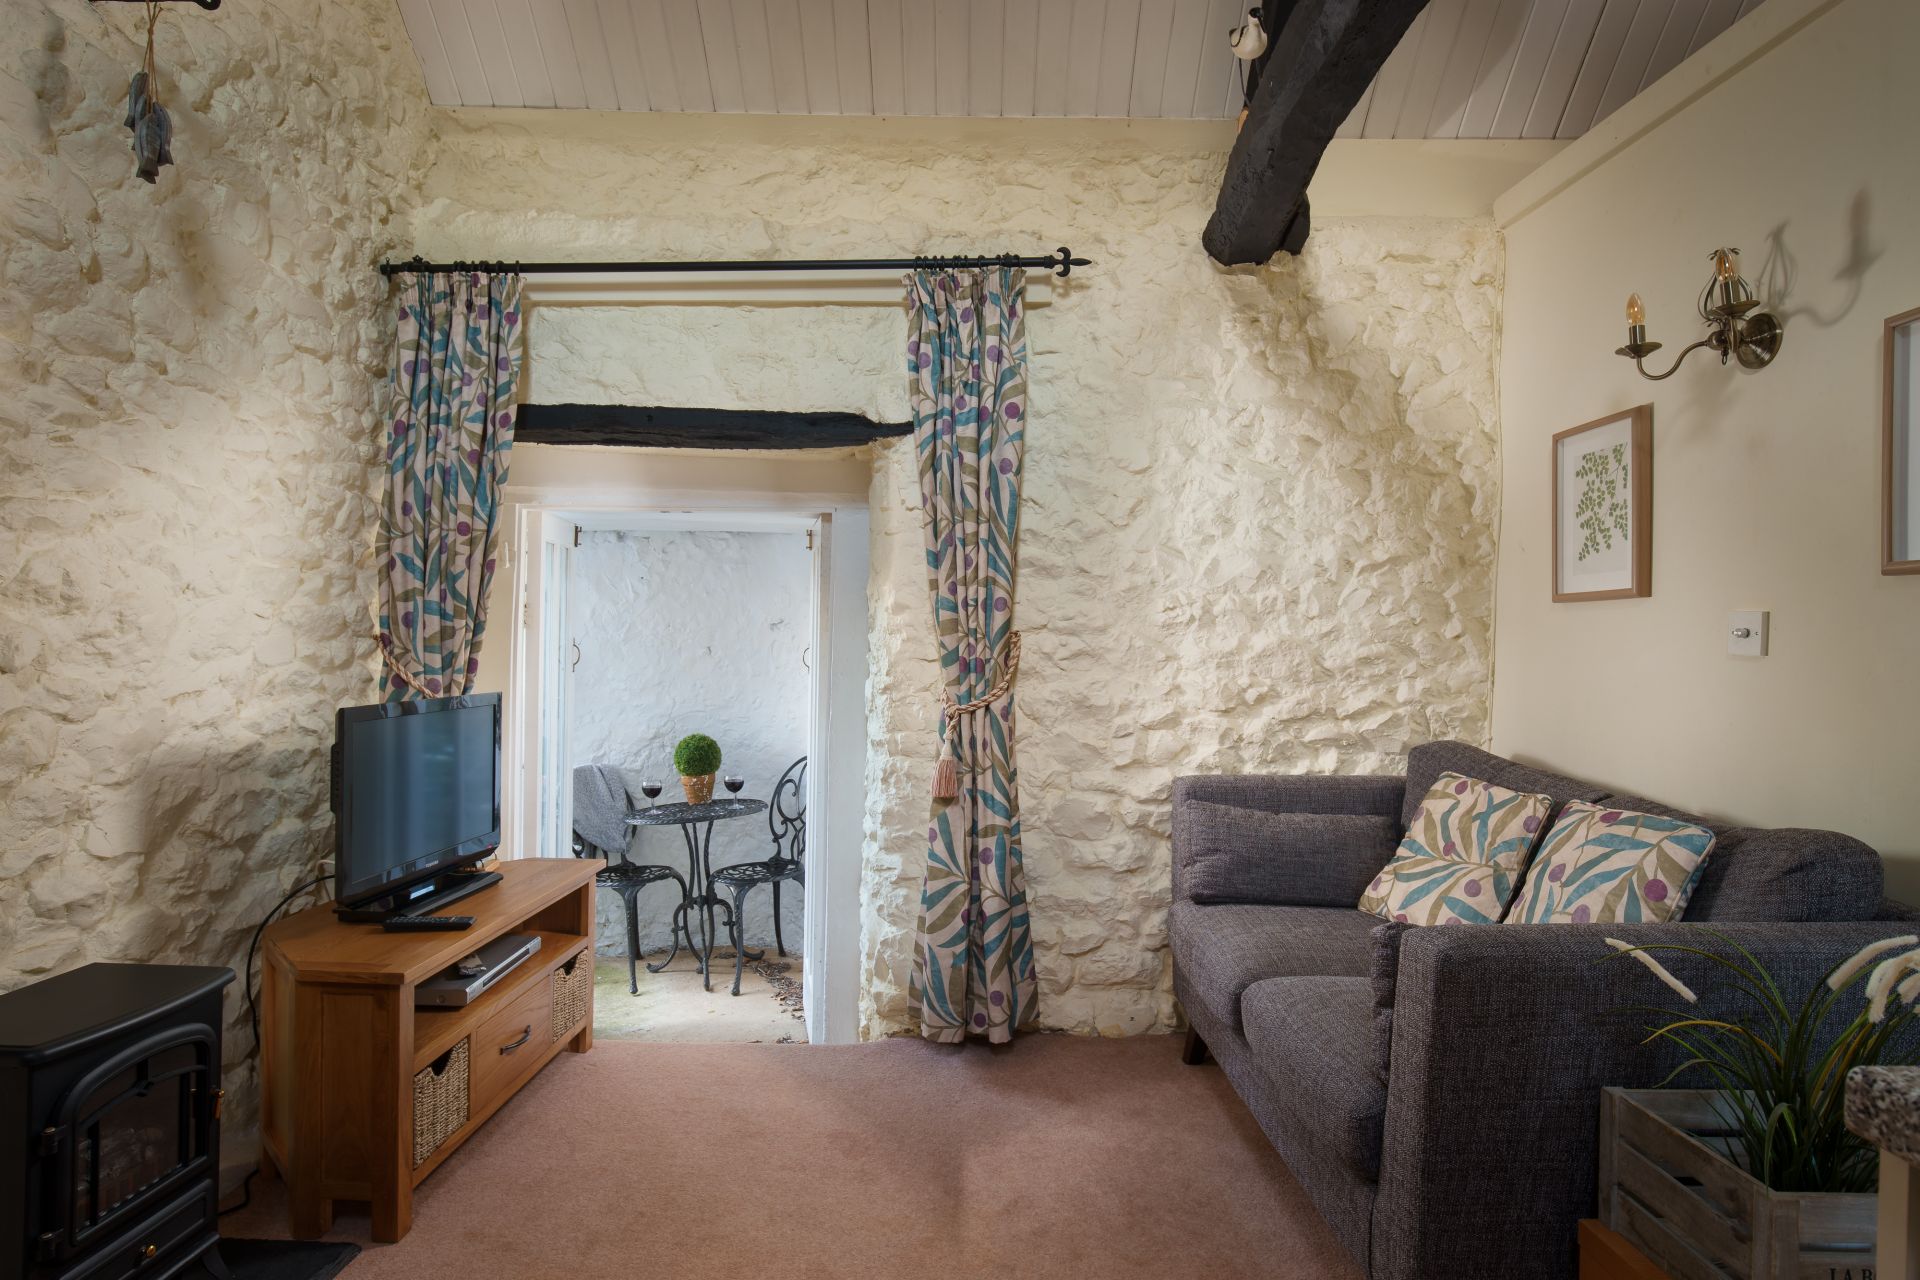 Details about a cottage Holiday at Swallow Cottage